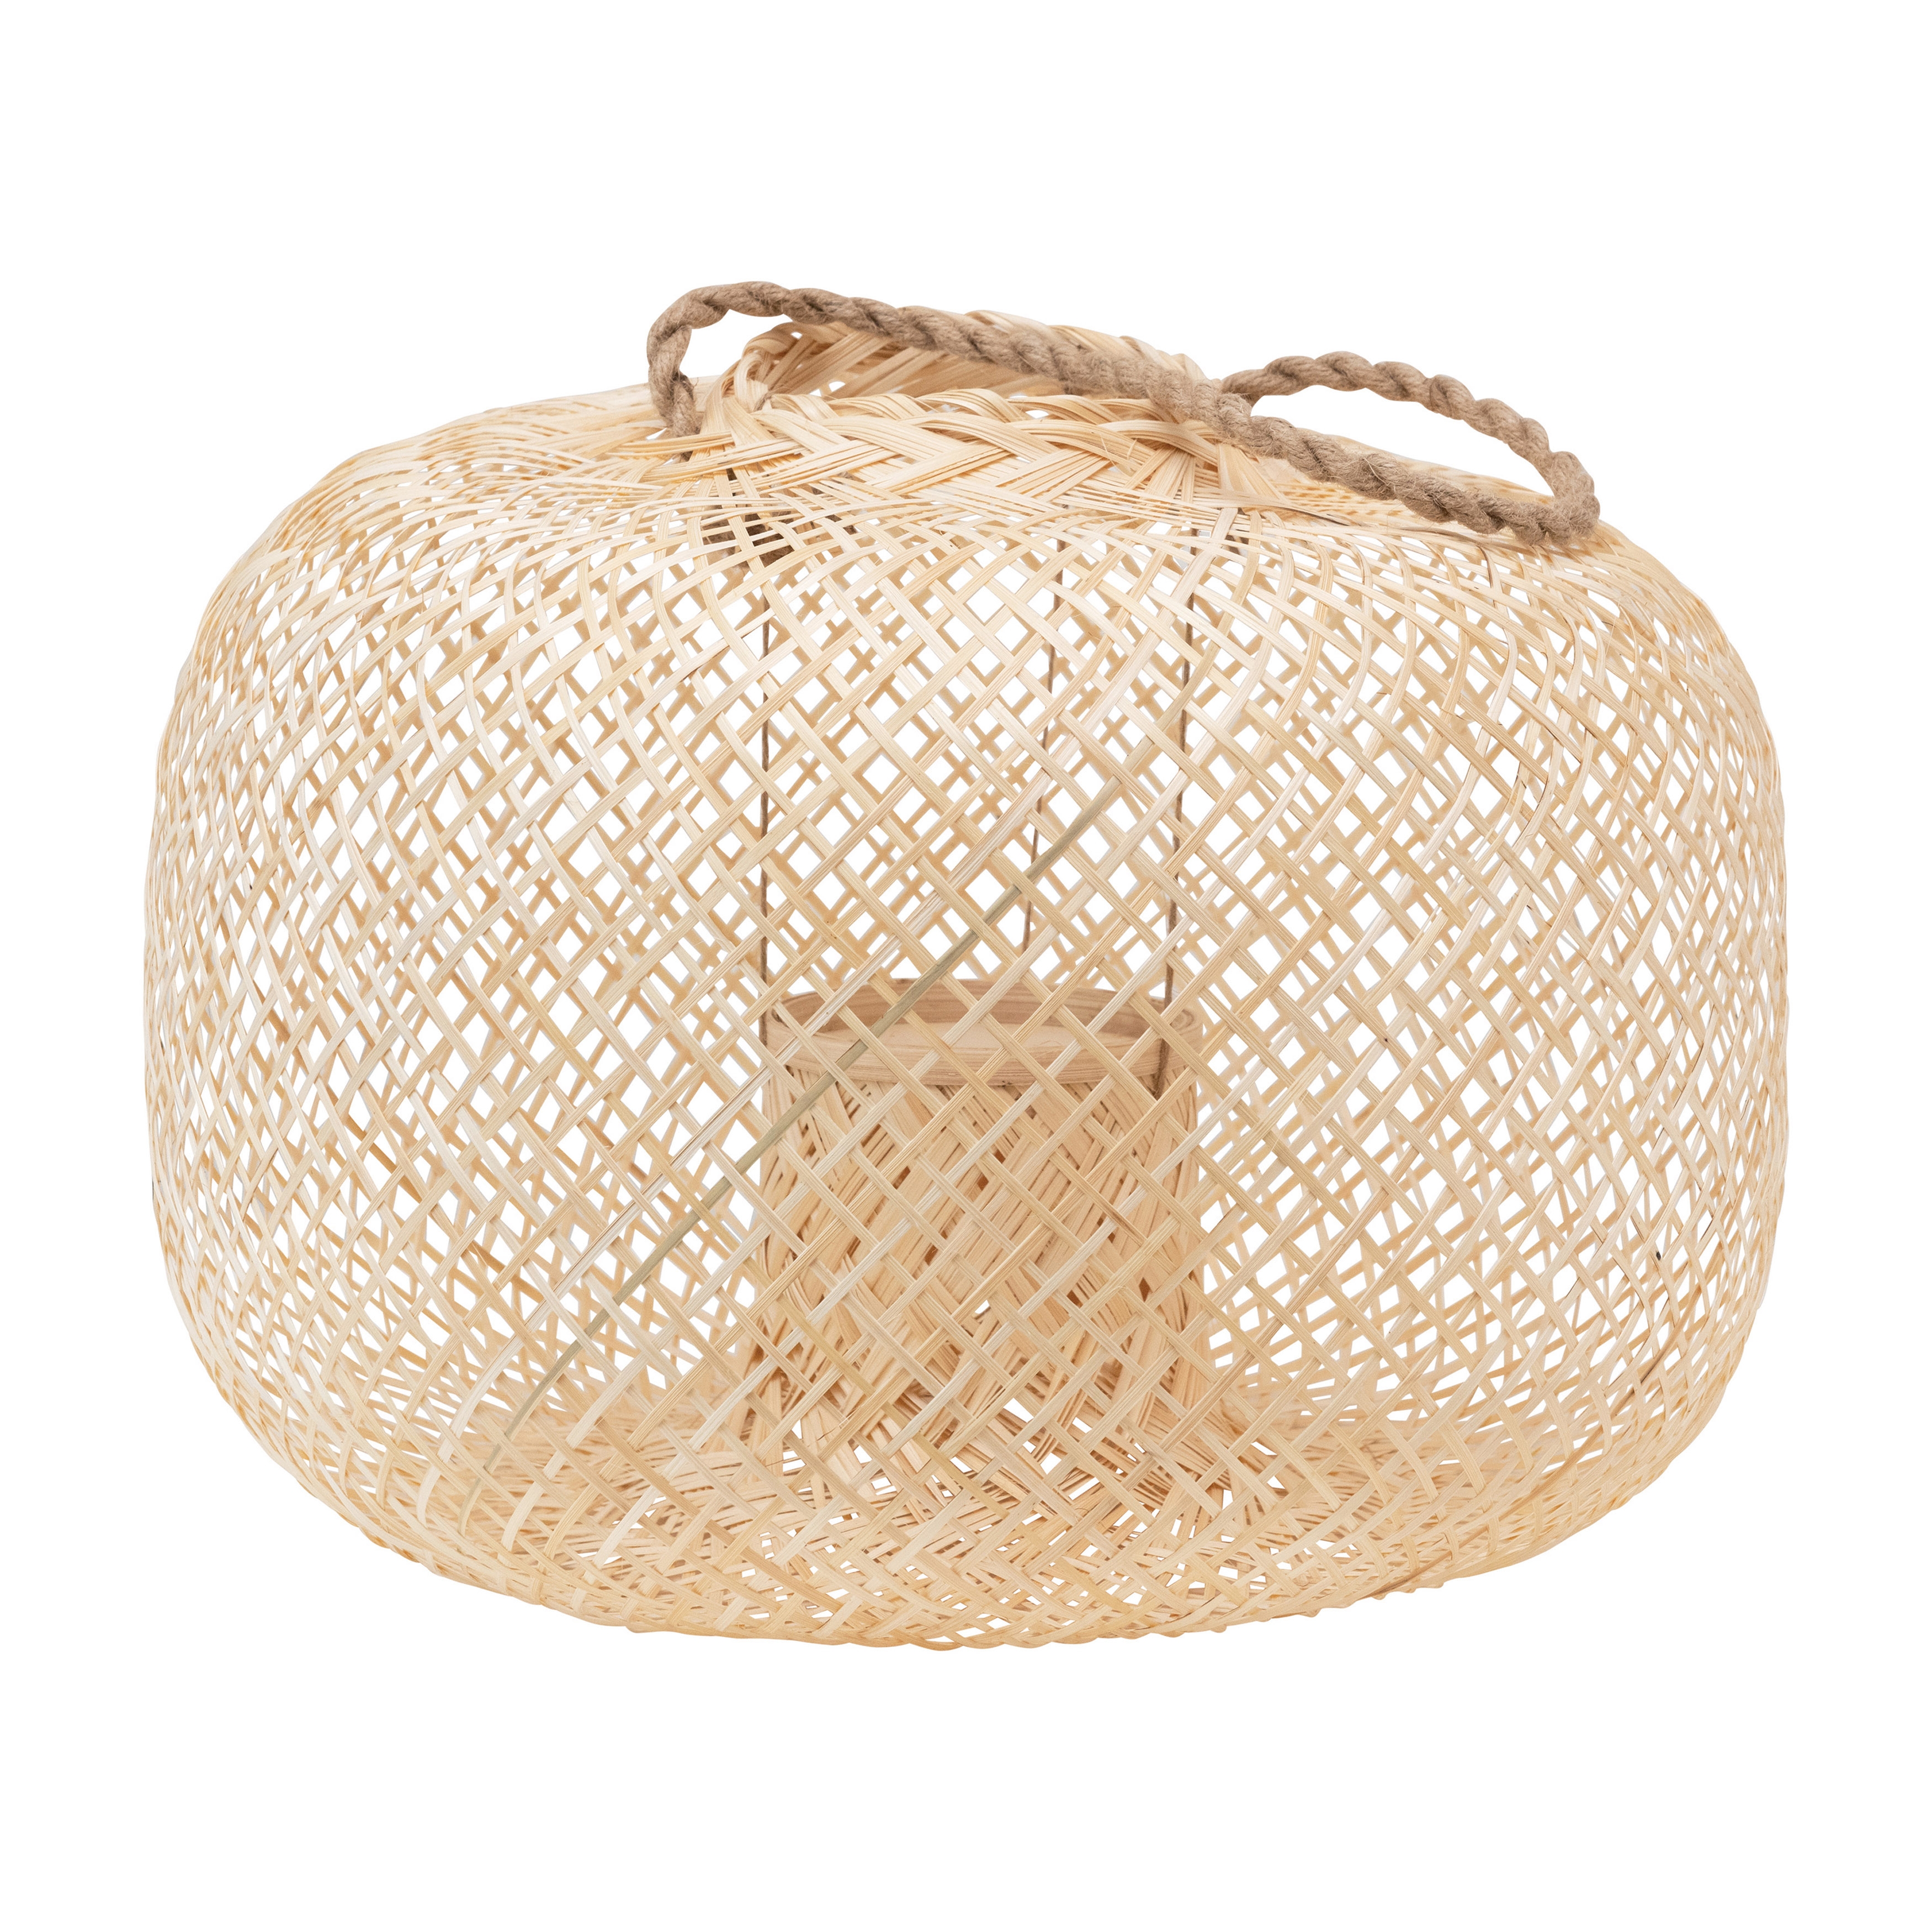 Hand-Woven Bamboo Lantern with Jute Handle & Glass Insert, Natural - Image 0